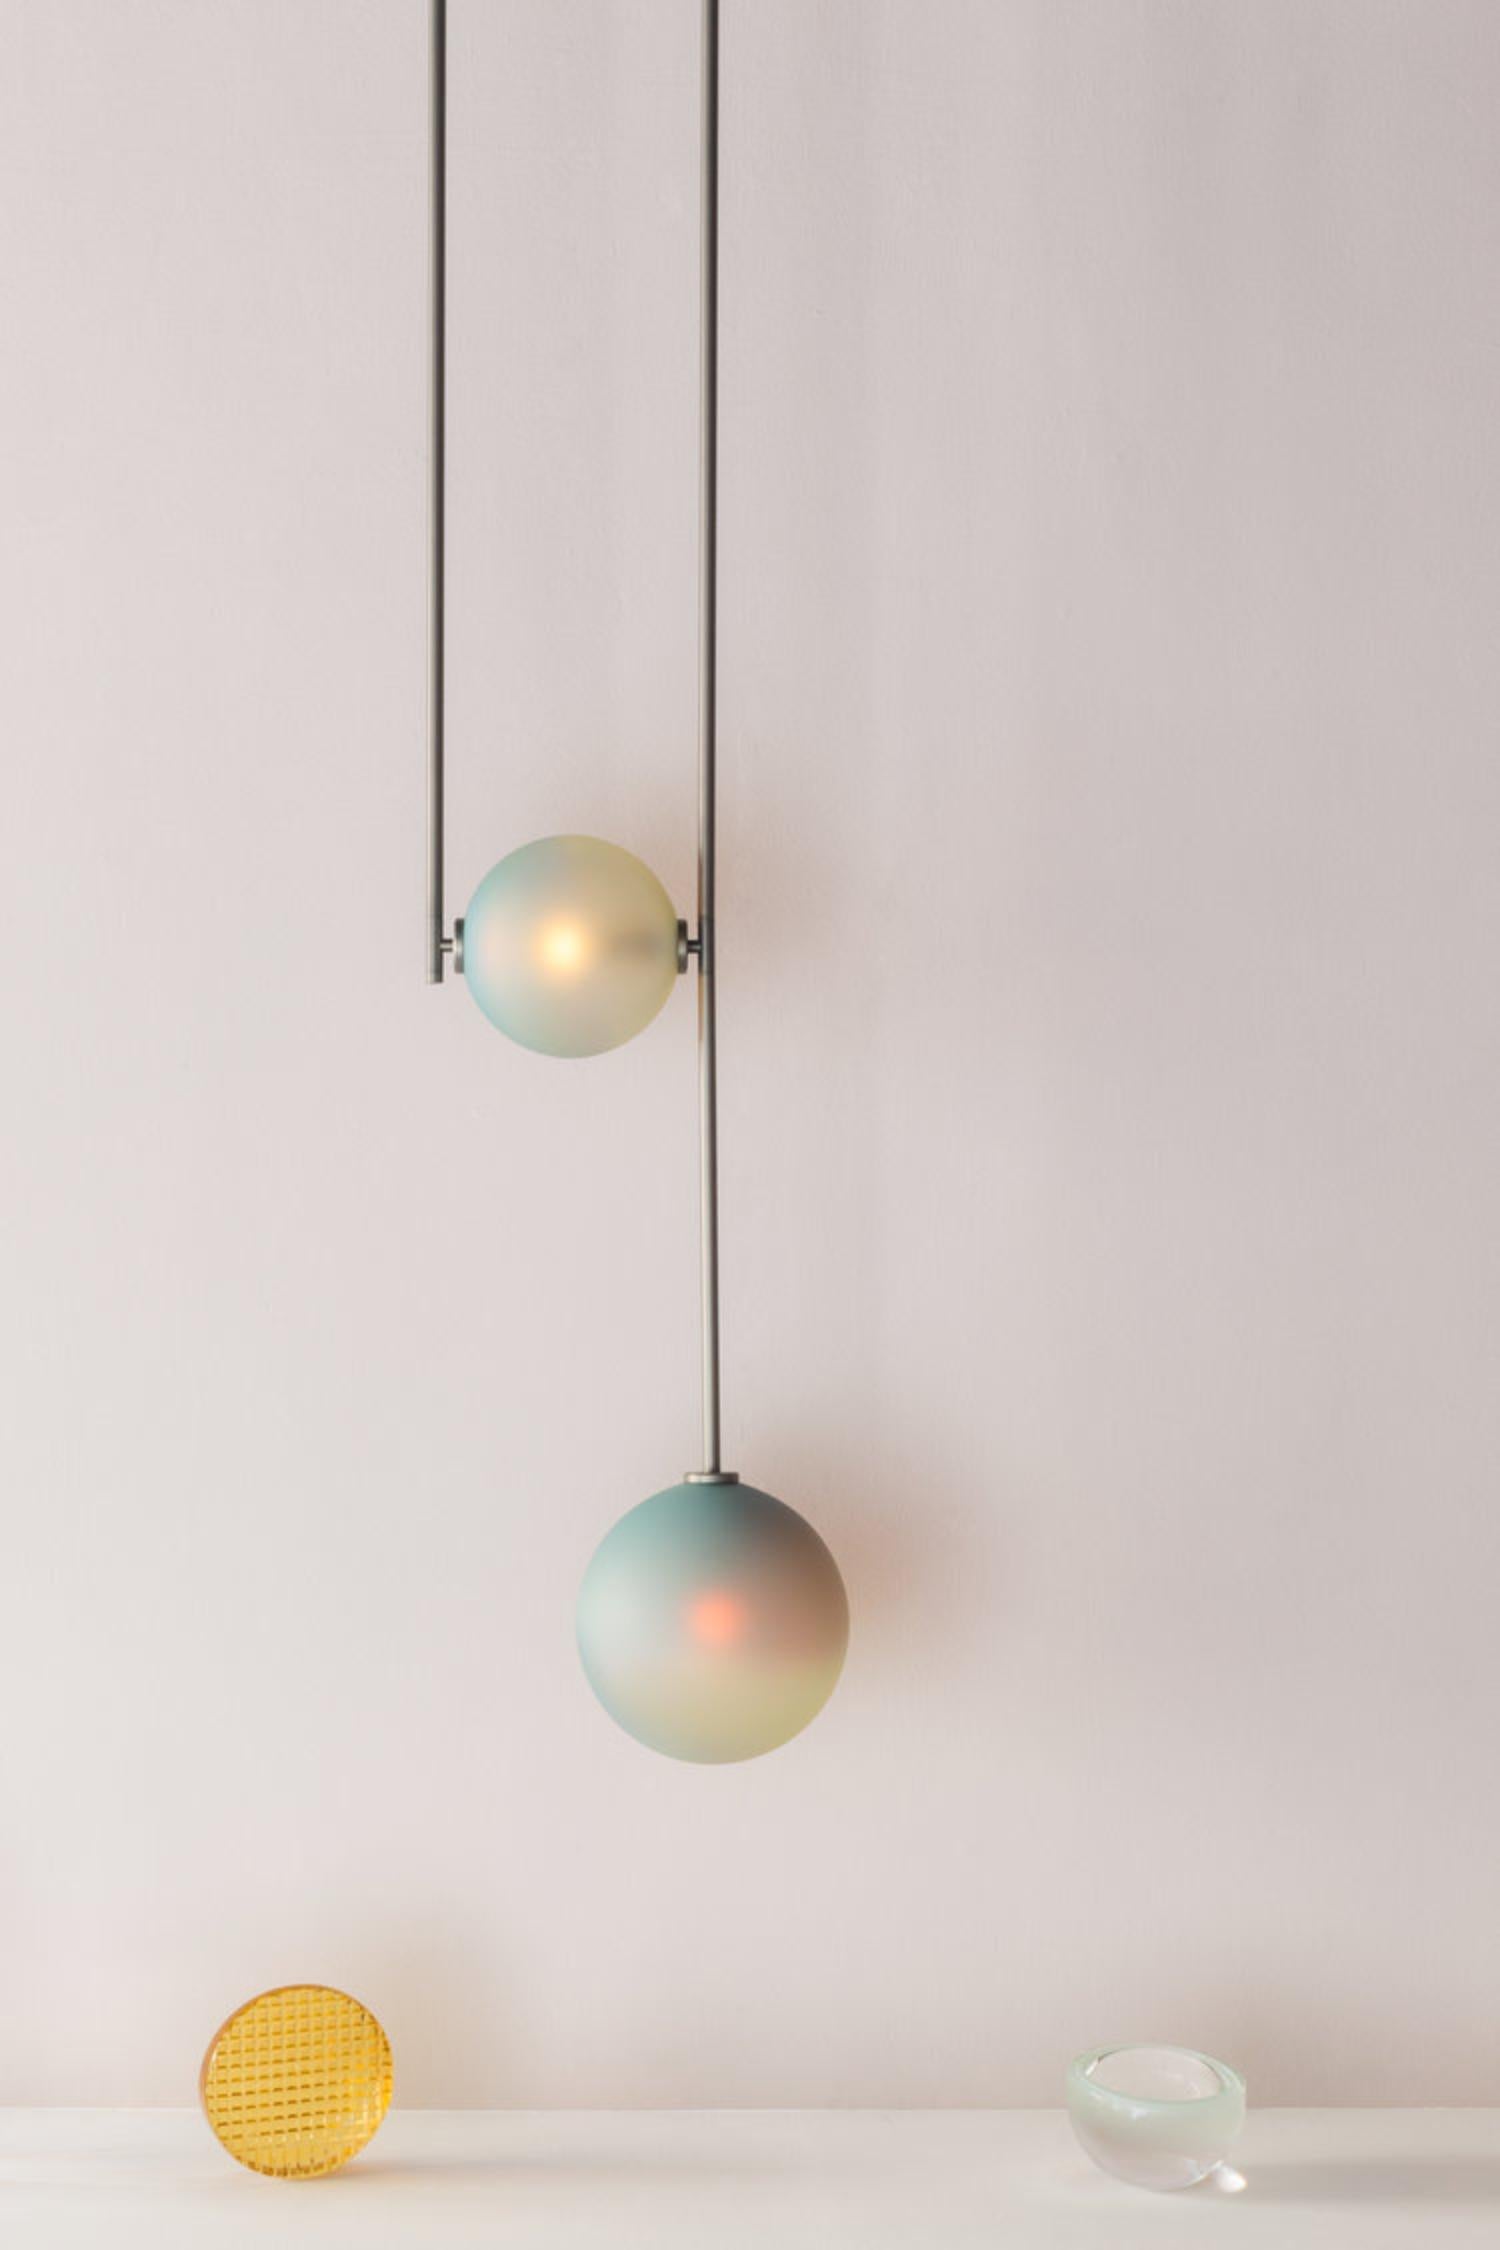 Equalizer chameleon globe pendant light by Ladies & Gentlemen Studio 
Dimensions: Height variable, 12” round canopy
Materials: Copper, brass, wire, cord
Finishes: Black anodize/bronze 
 Anodize/olive anodize
 Glass: cream/smokey green/chameleon

All